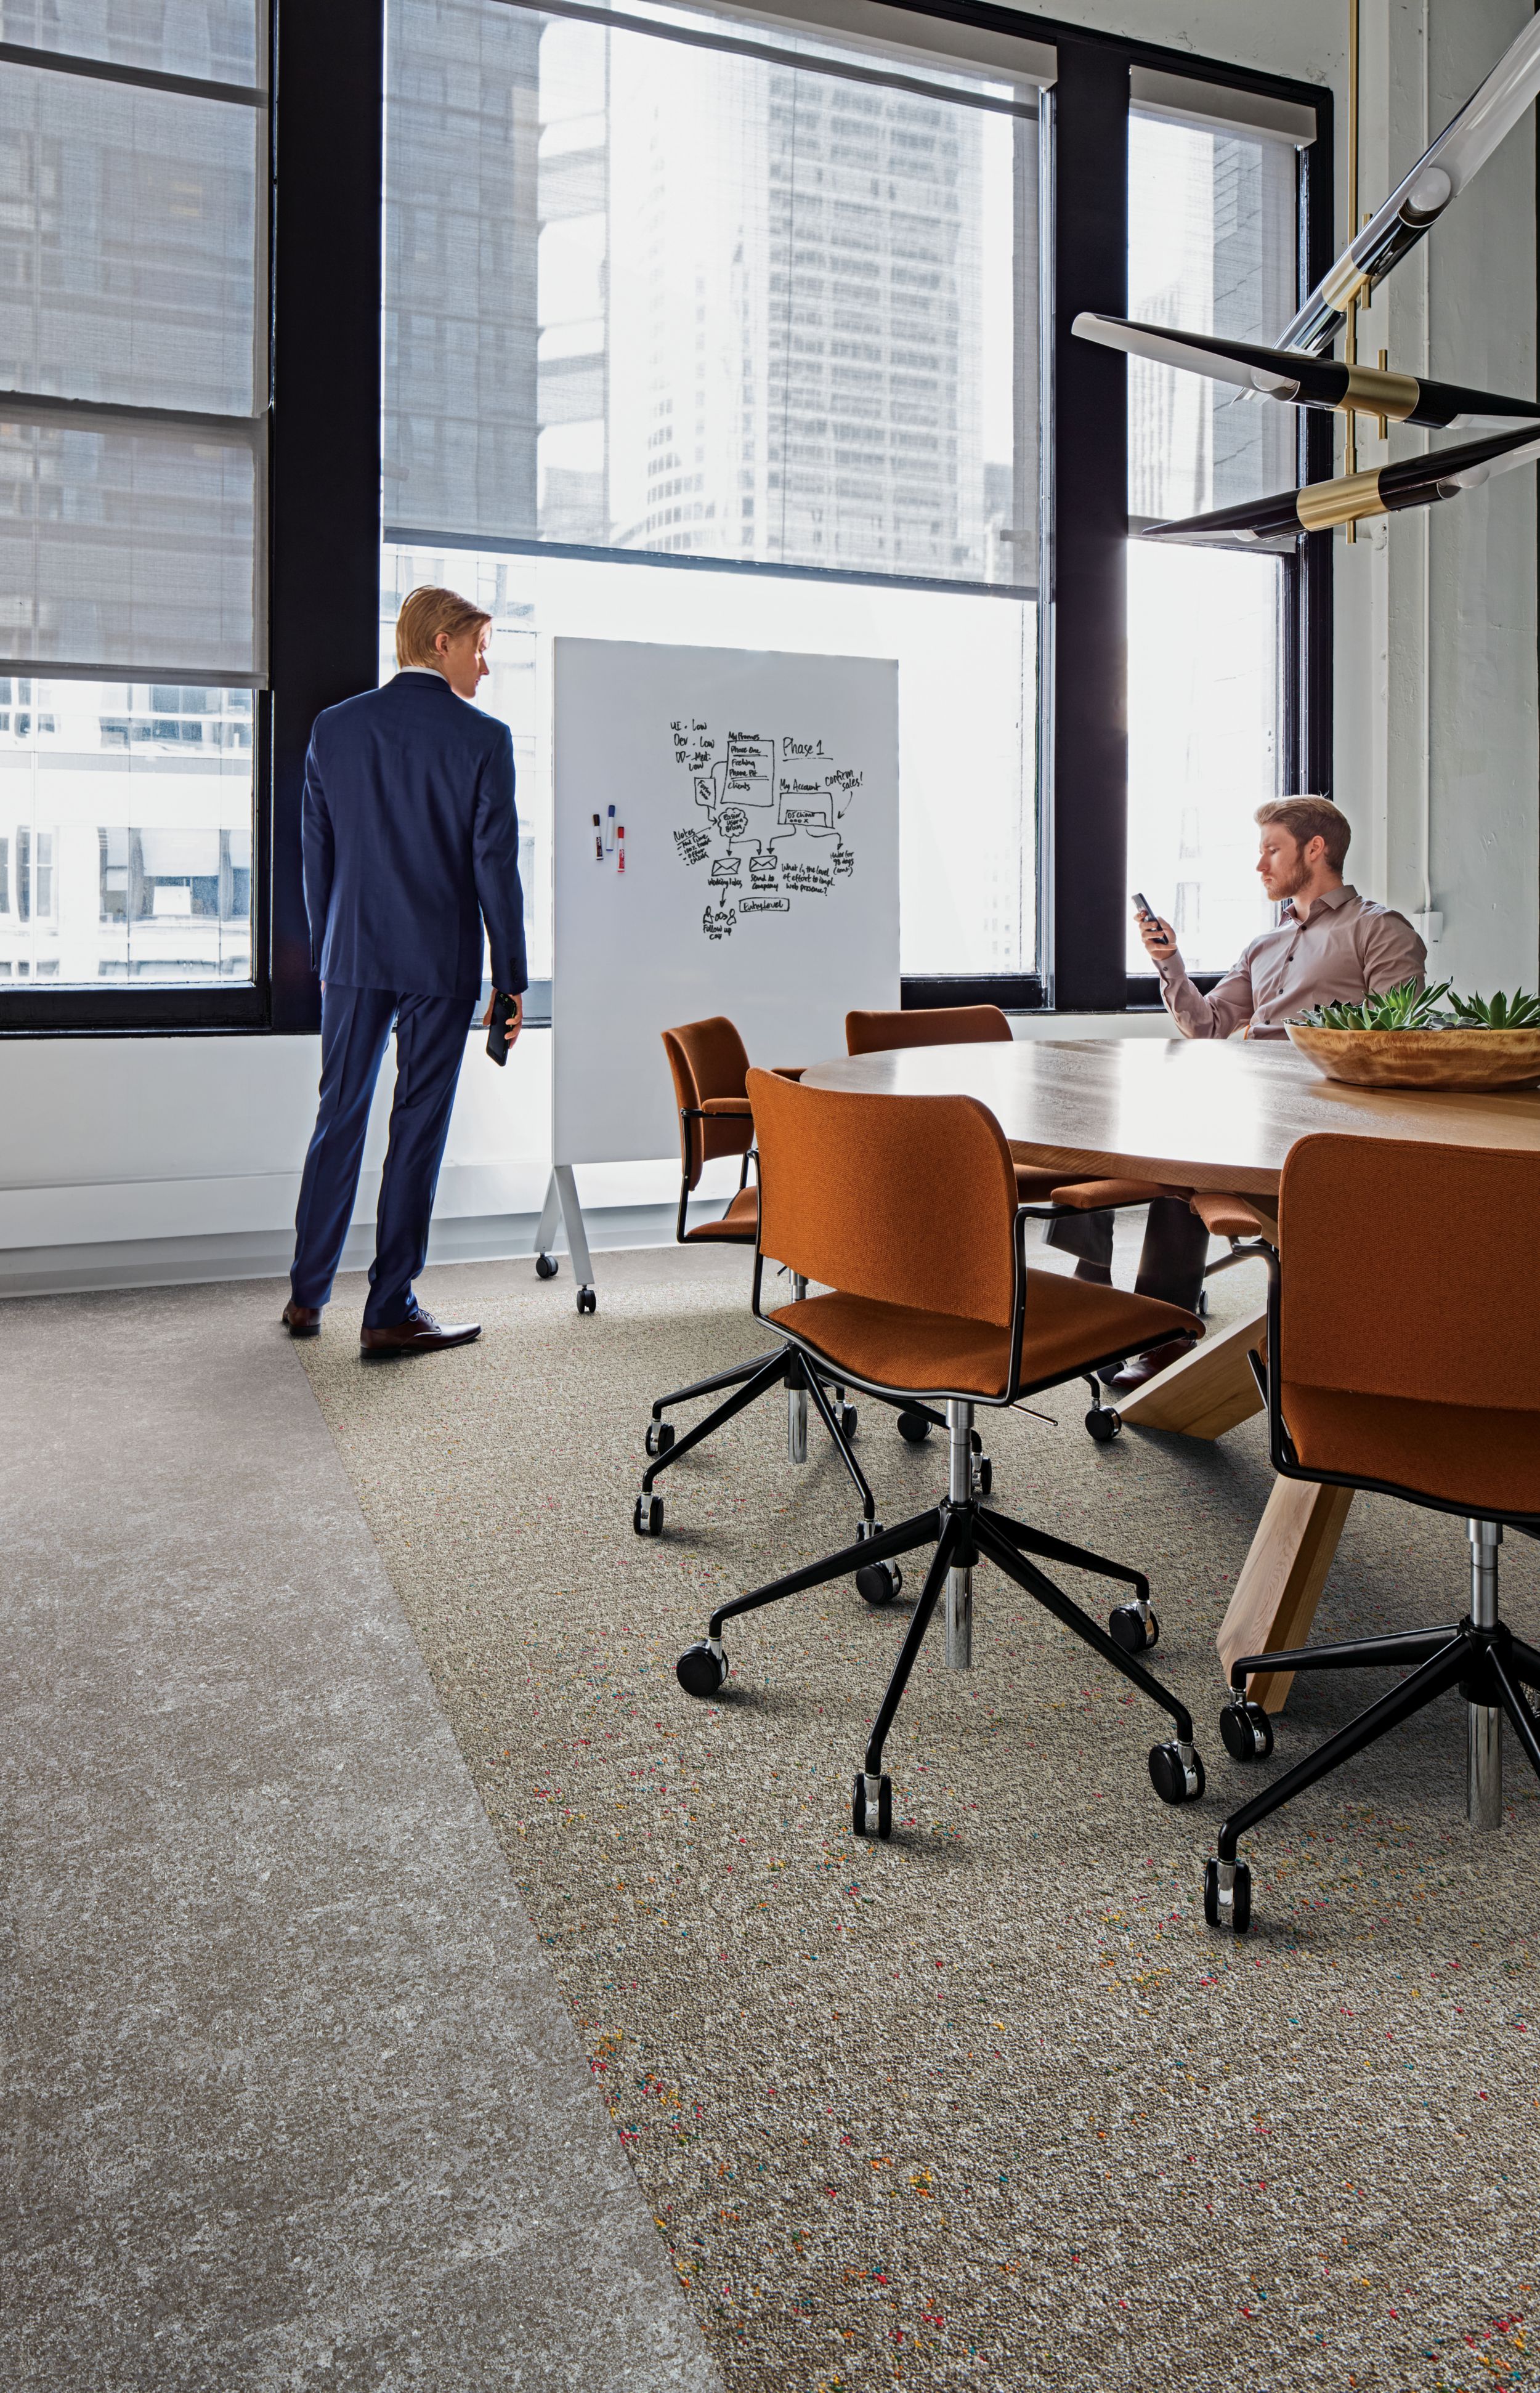 image Interface Walk of Life LVT and Step Aside carpet tile in meeting space with conference table and chairs numéro 3